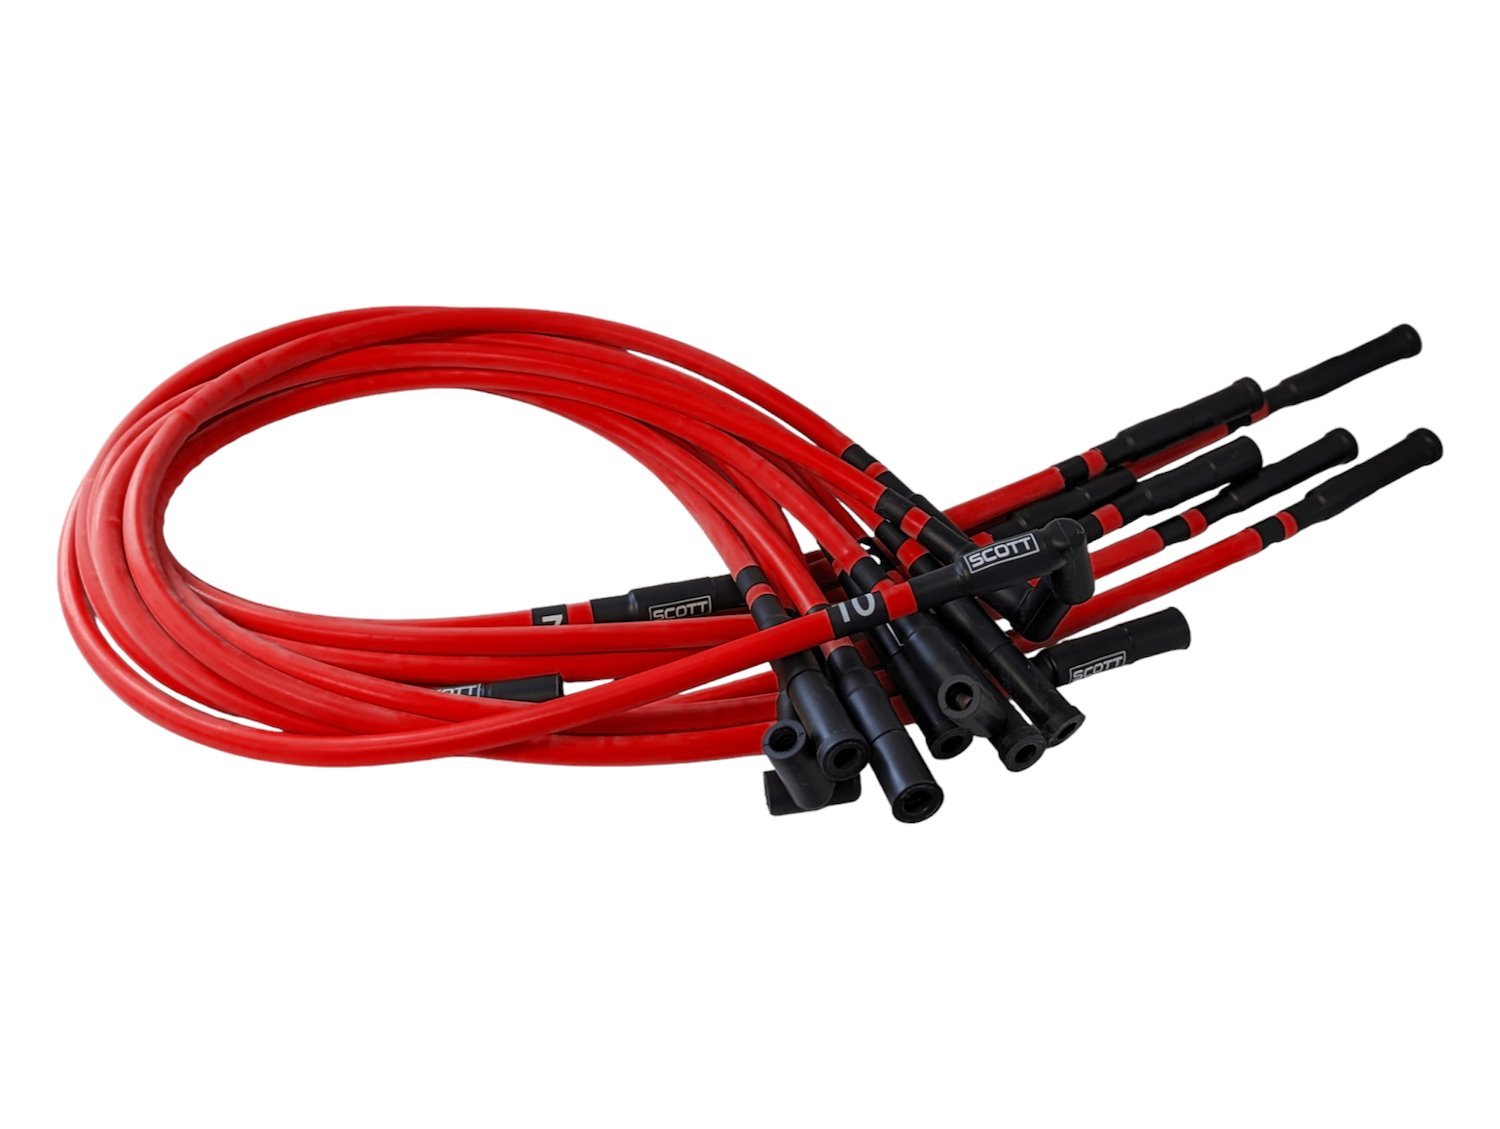 SPW-CH-690-III-2 High-Performance Silicone-Sleeved Spark Plug Wire Set for Dodge Viper (Gen-3) [Red]